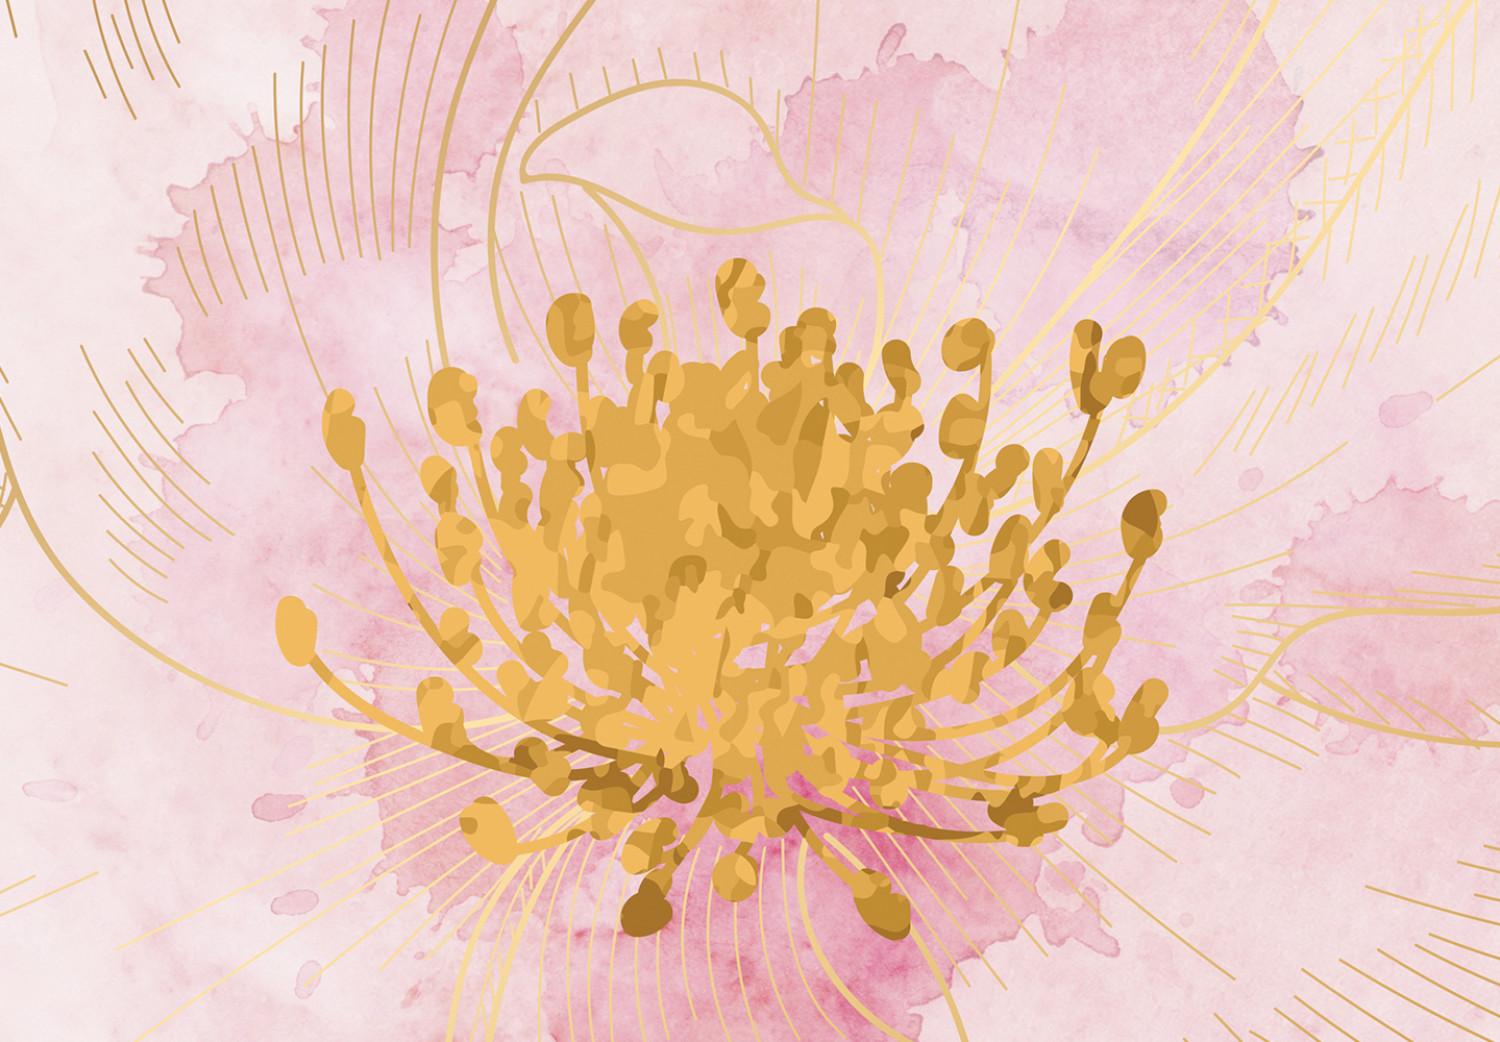 Canvas Flowering - Abstraction with flowers on a pink background